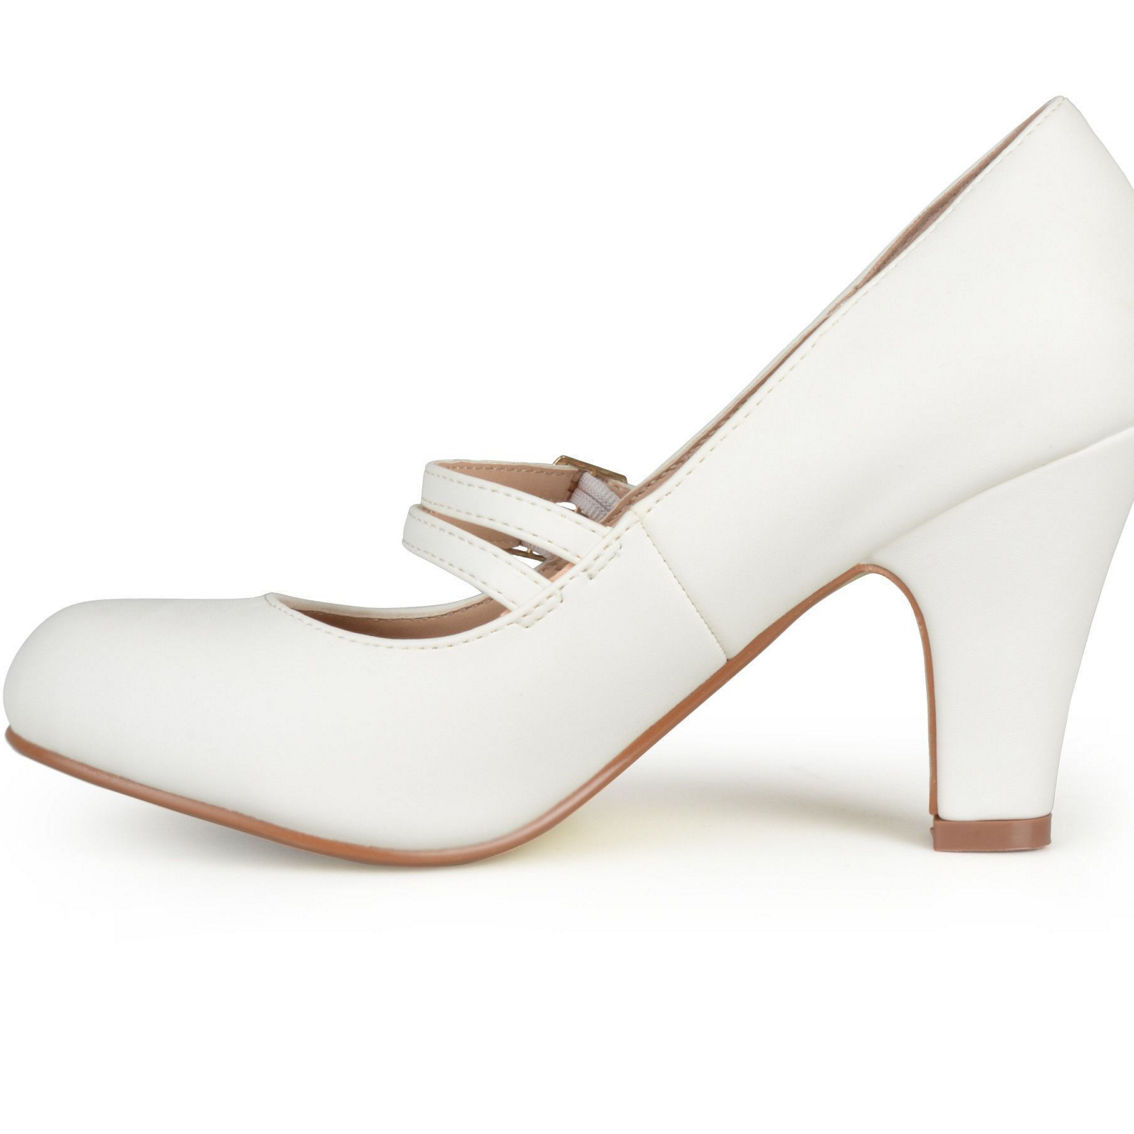 Journee Collection Women's Medium, Wide and Narrow Width Windy Pumps - Image 4 of 5